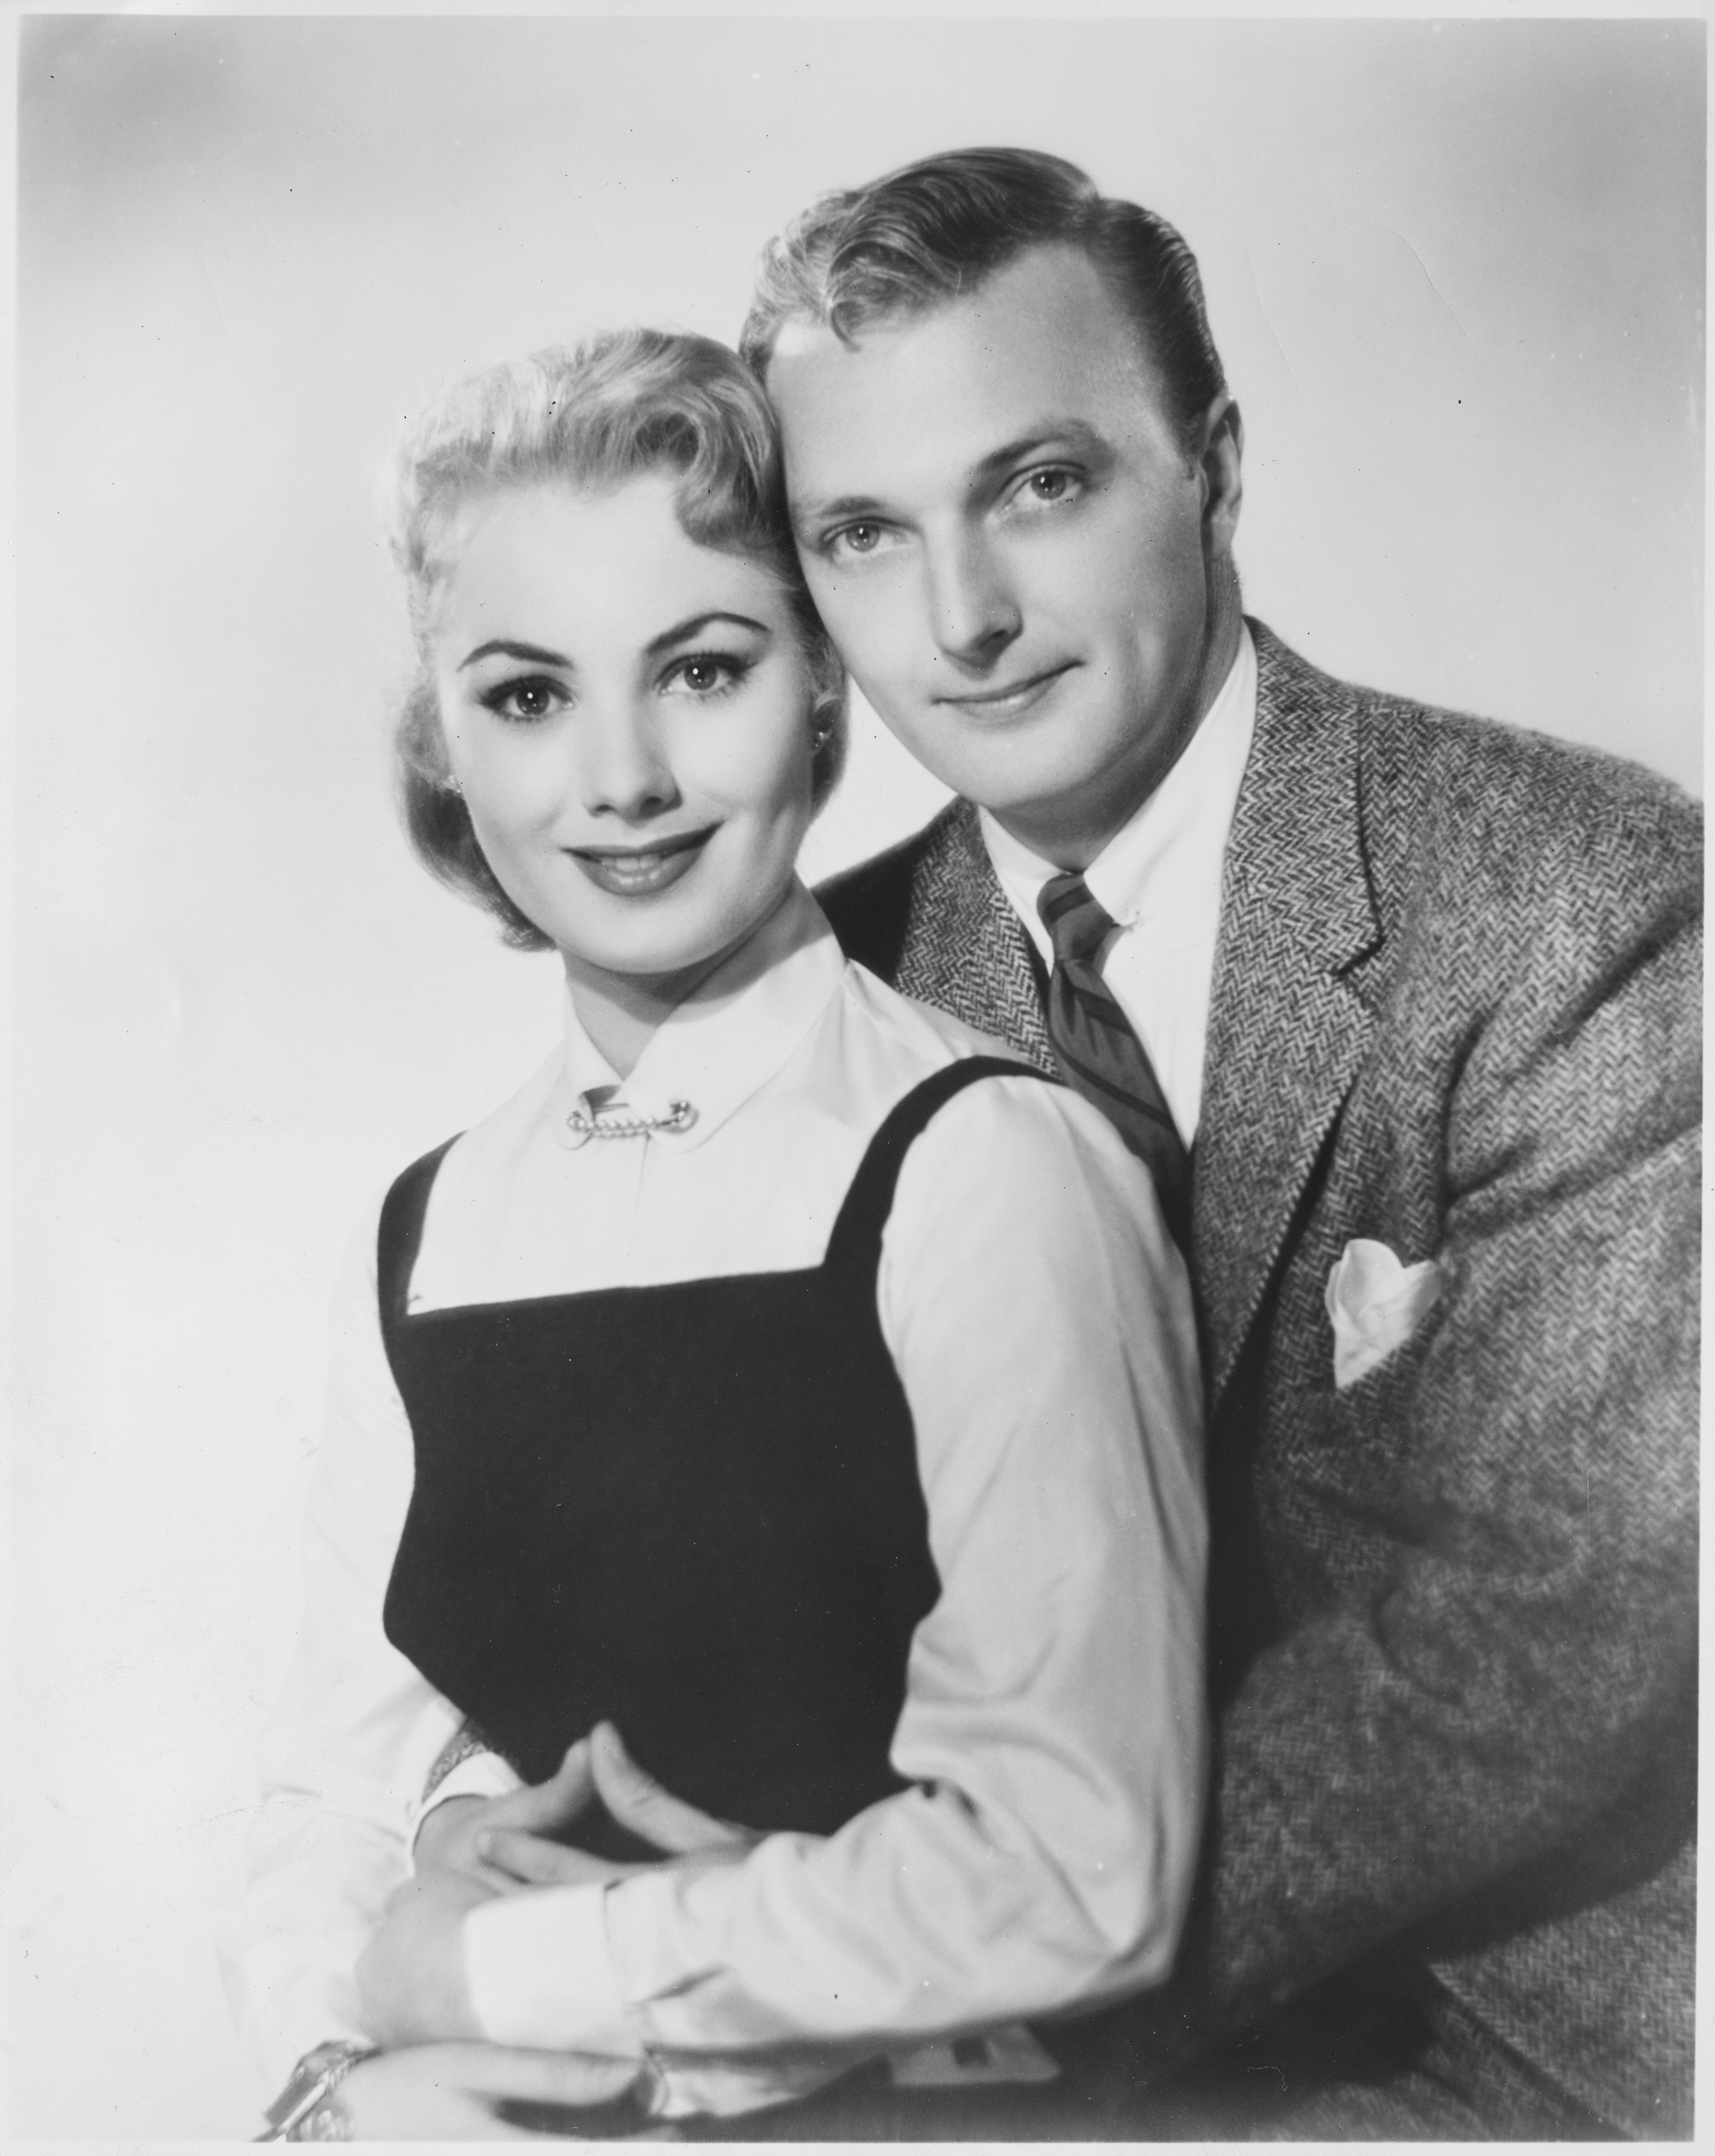 Shirley Jones and Jack Cassidy posing together circa 1950 | Source: Getty Images